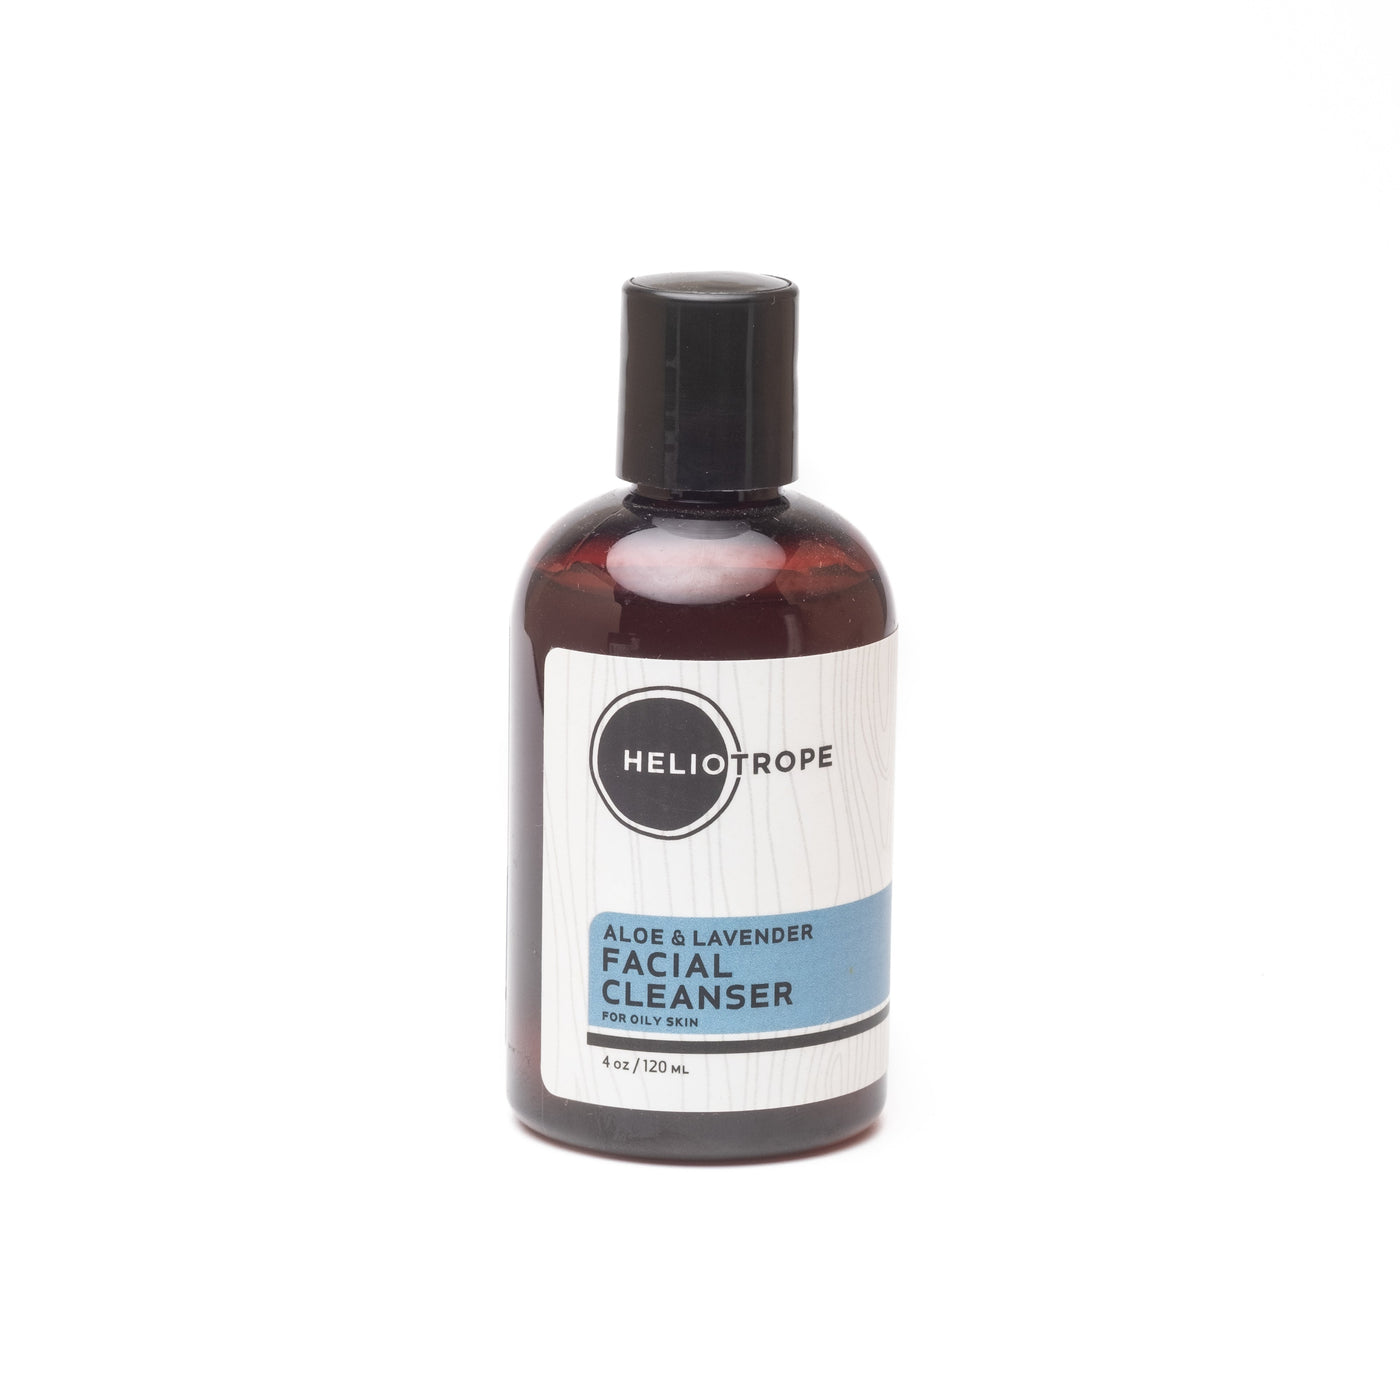 Aloe & Lavender Facial Cleanser by Heliotrope San Francisco